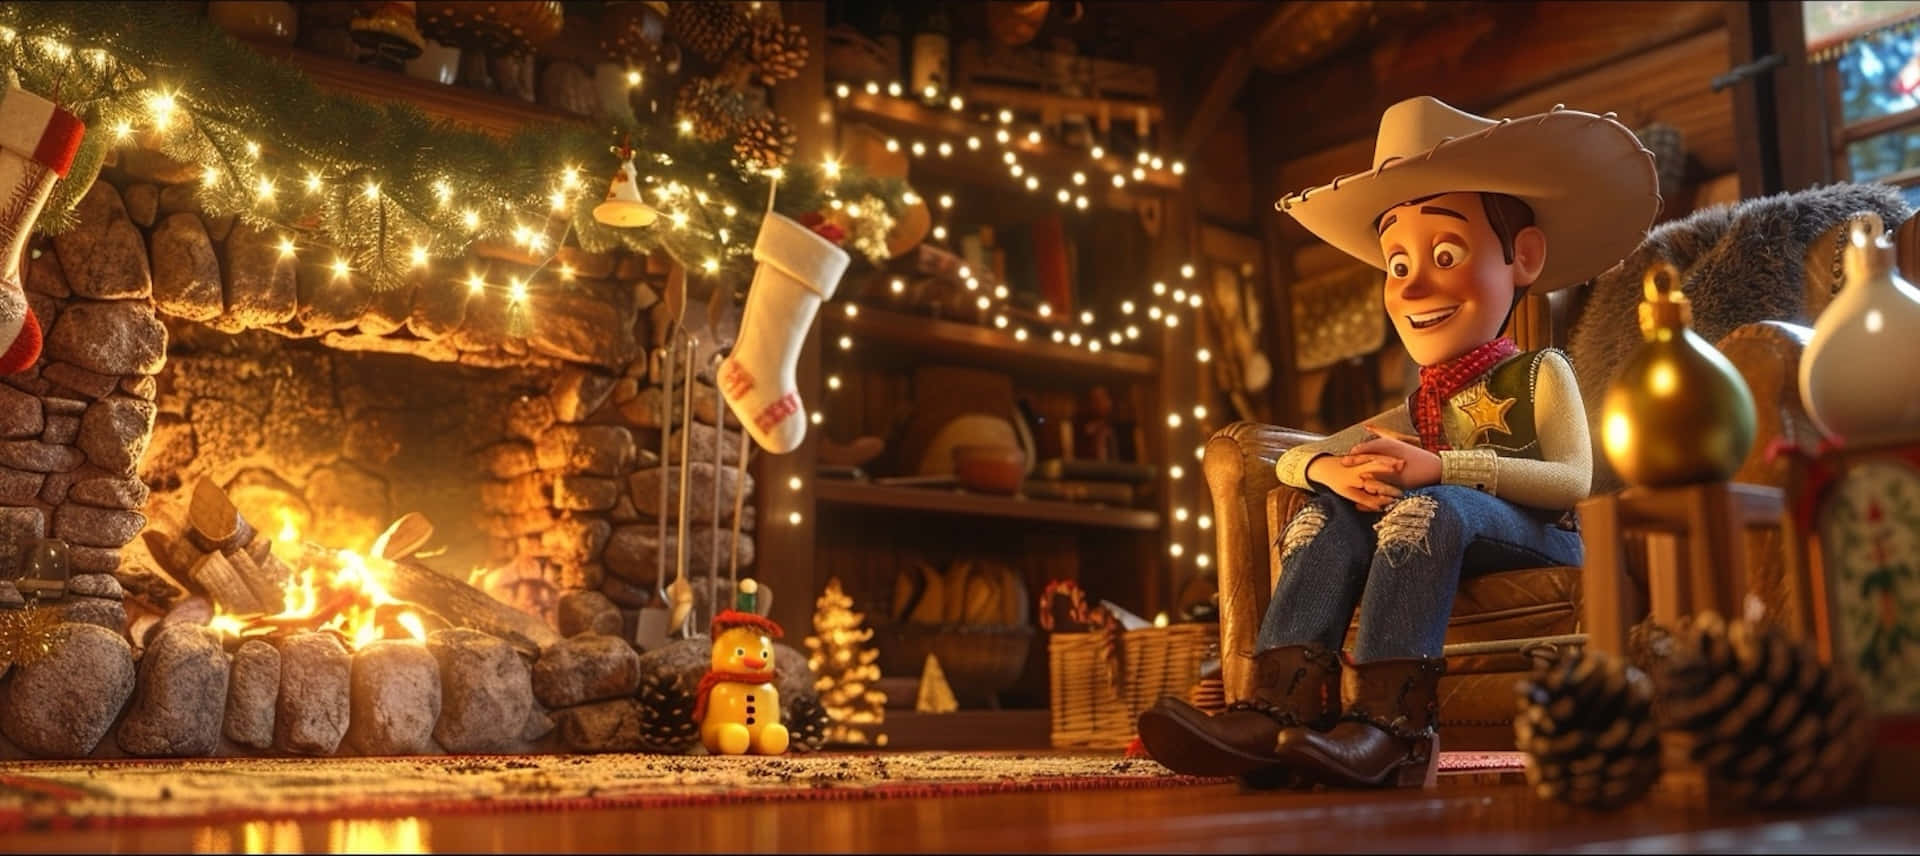 Cozy Christmas With Cowboy Toy Wallpaper